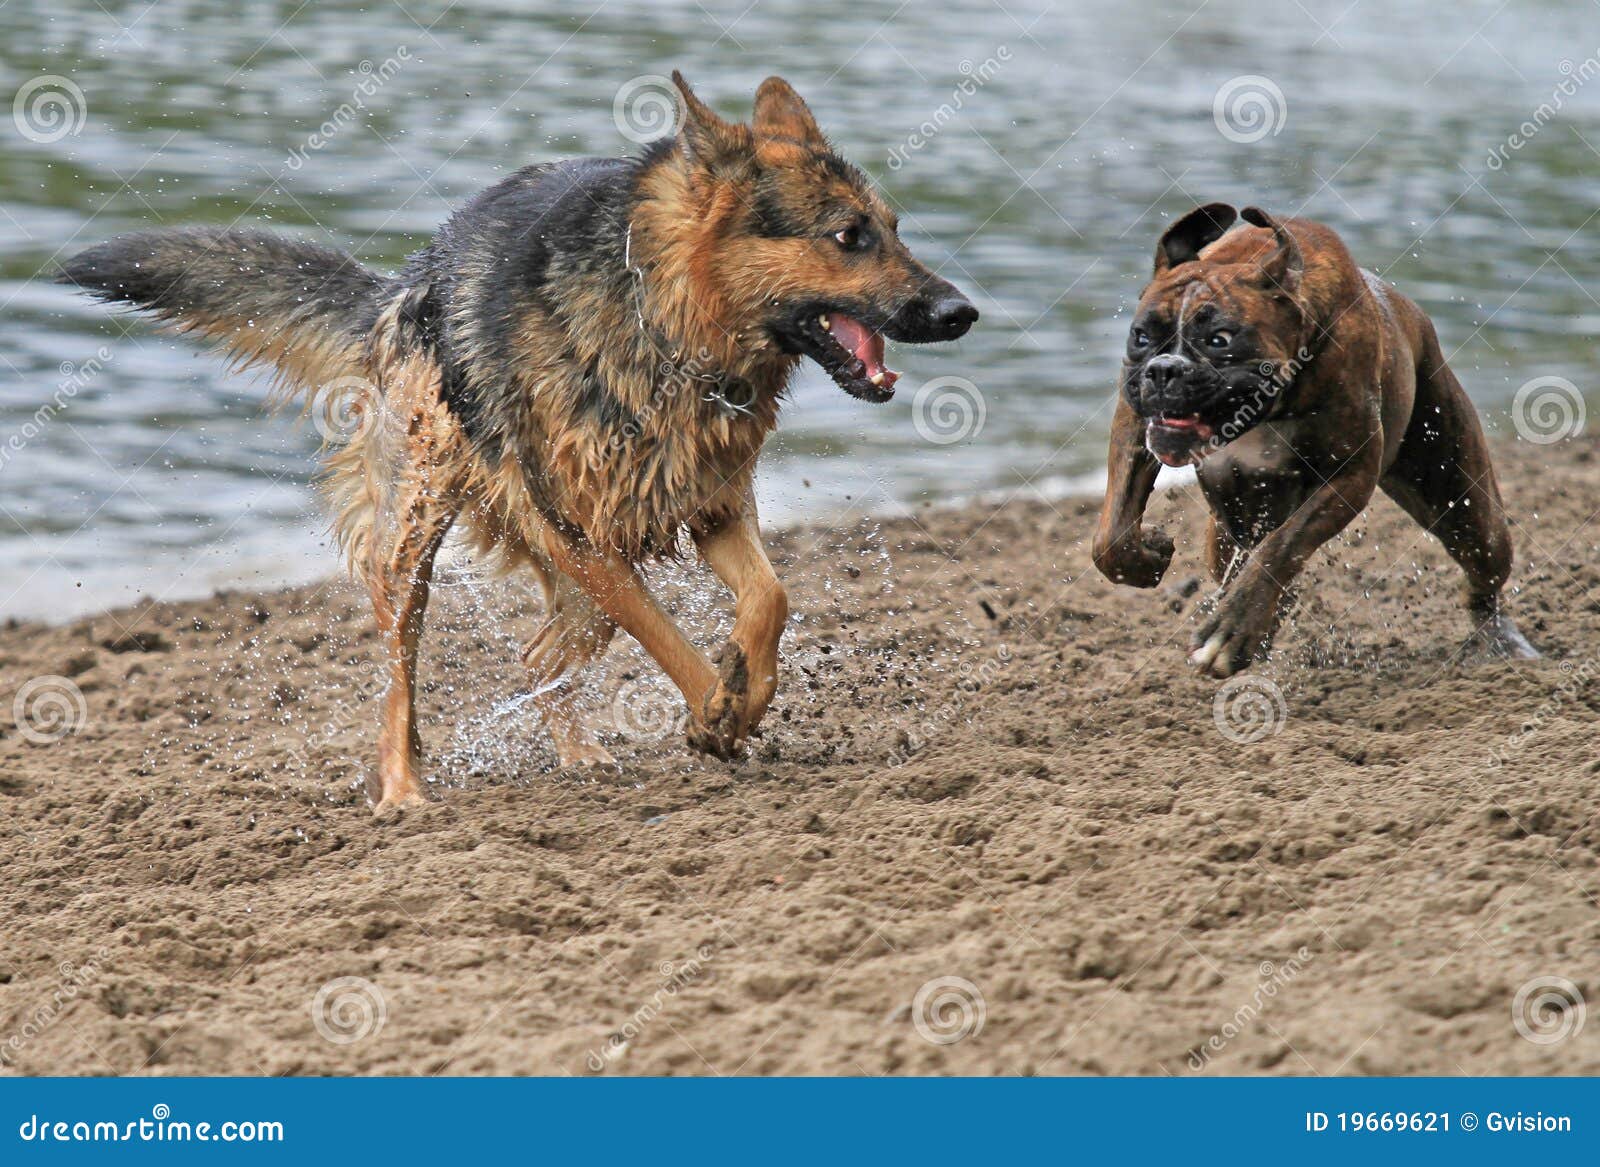 action dogs